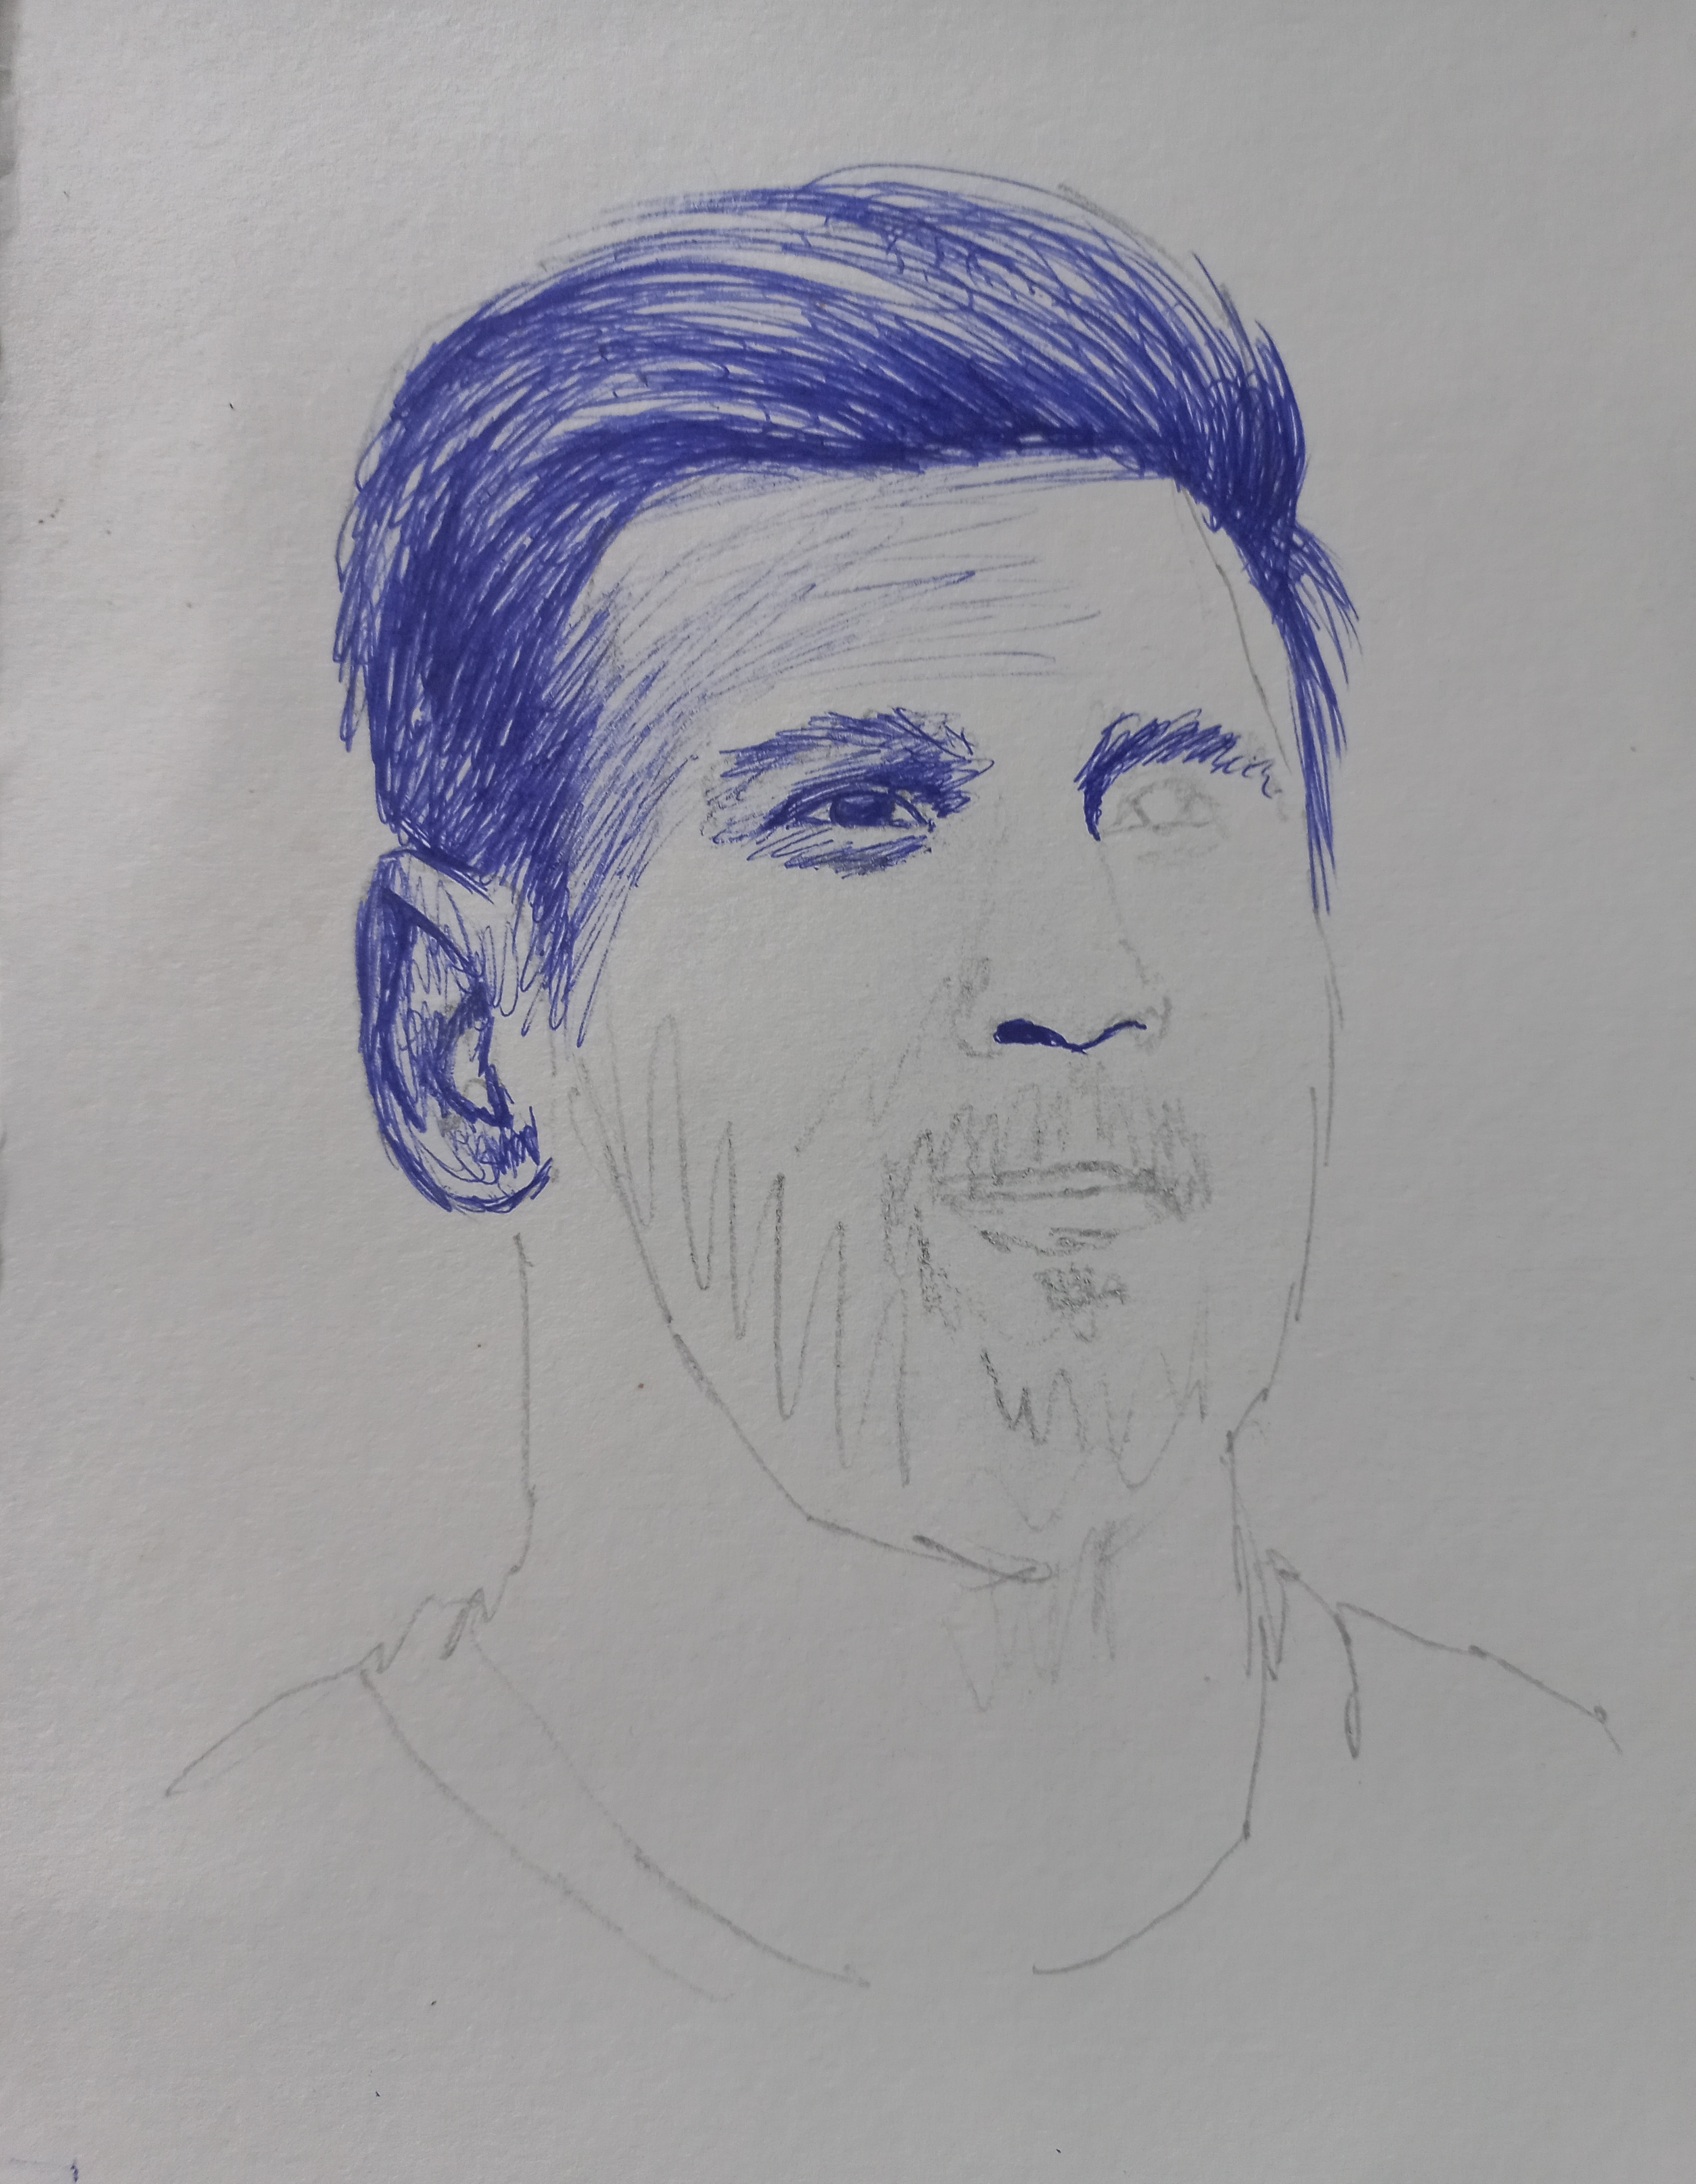 How to draw Lionel Messi Step by Step // full sketch outline tutorial for  beginners - YouTube